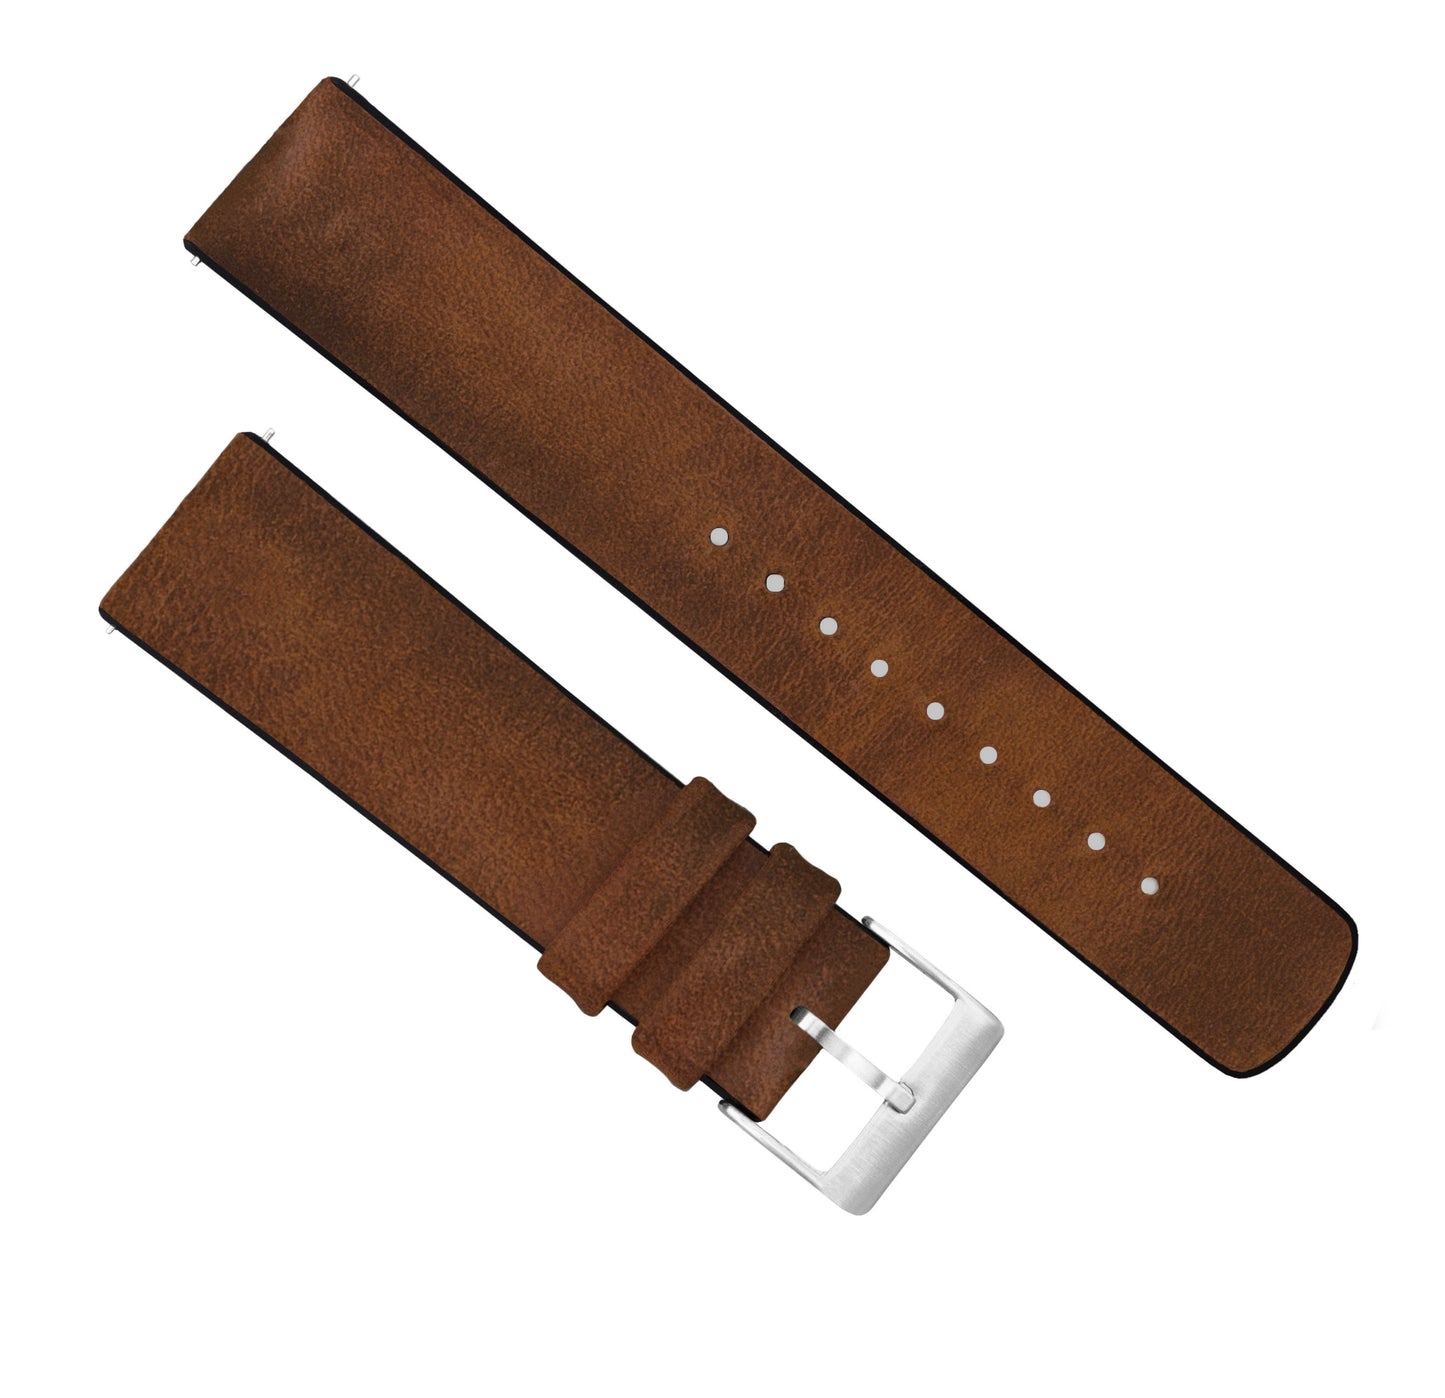 Samsung Galaxy Watch4 | Leather and Rubber Hybrid | Oak Brown - Barton Watch Bands